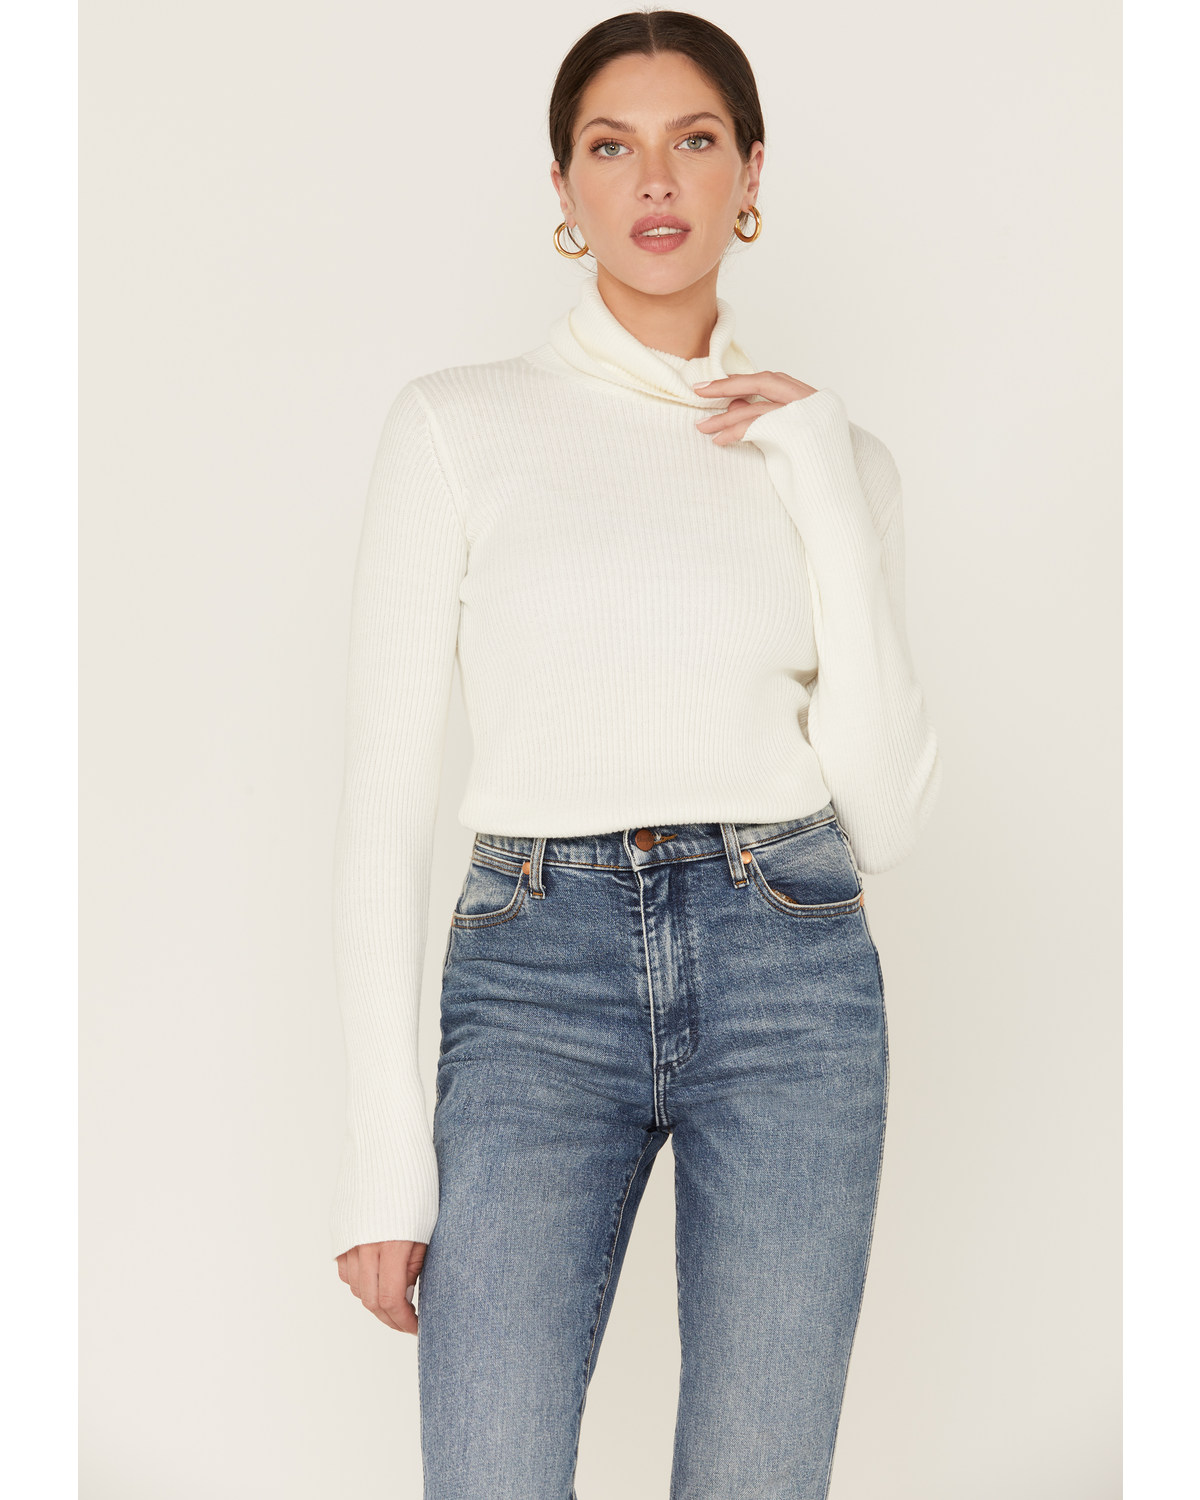 Cleo + Wolf Women's Ribbed Turtleneck Sweater